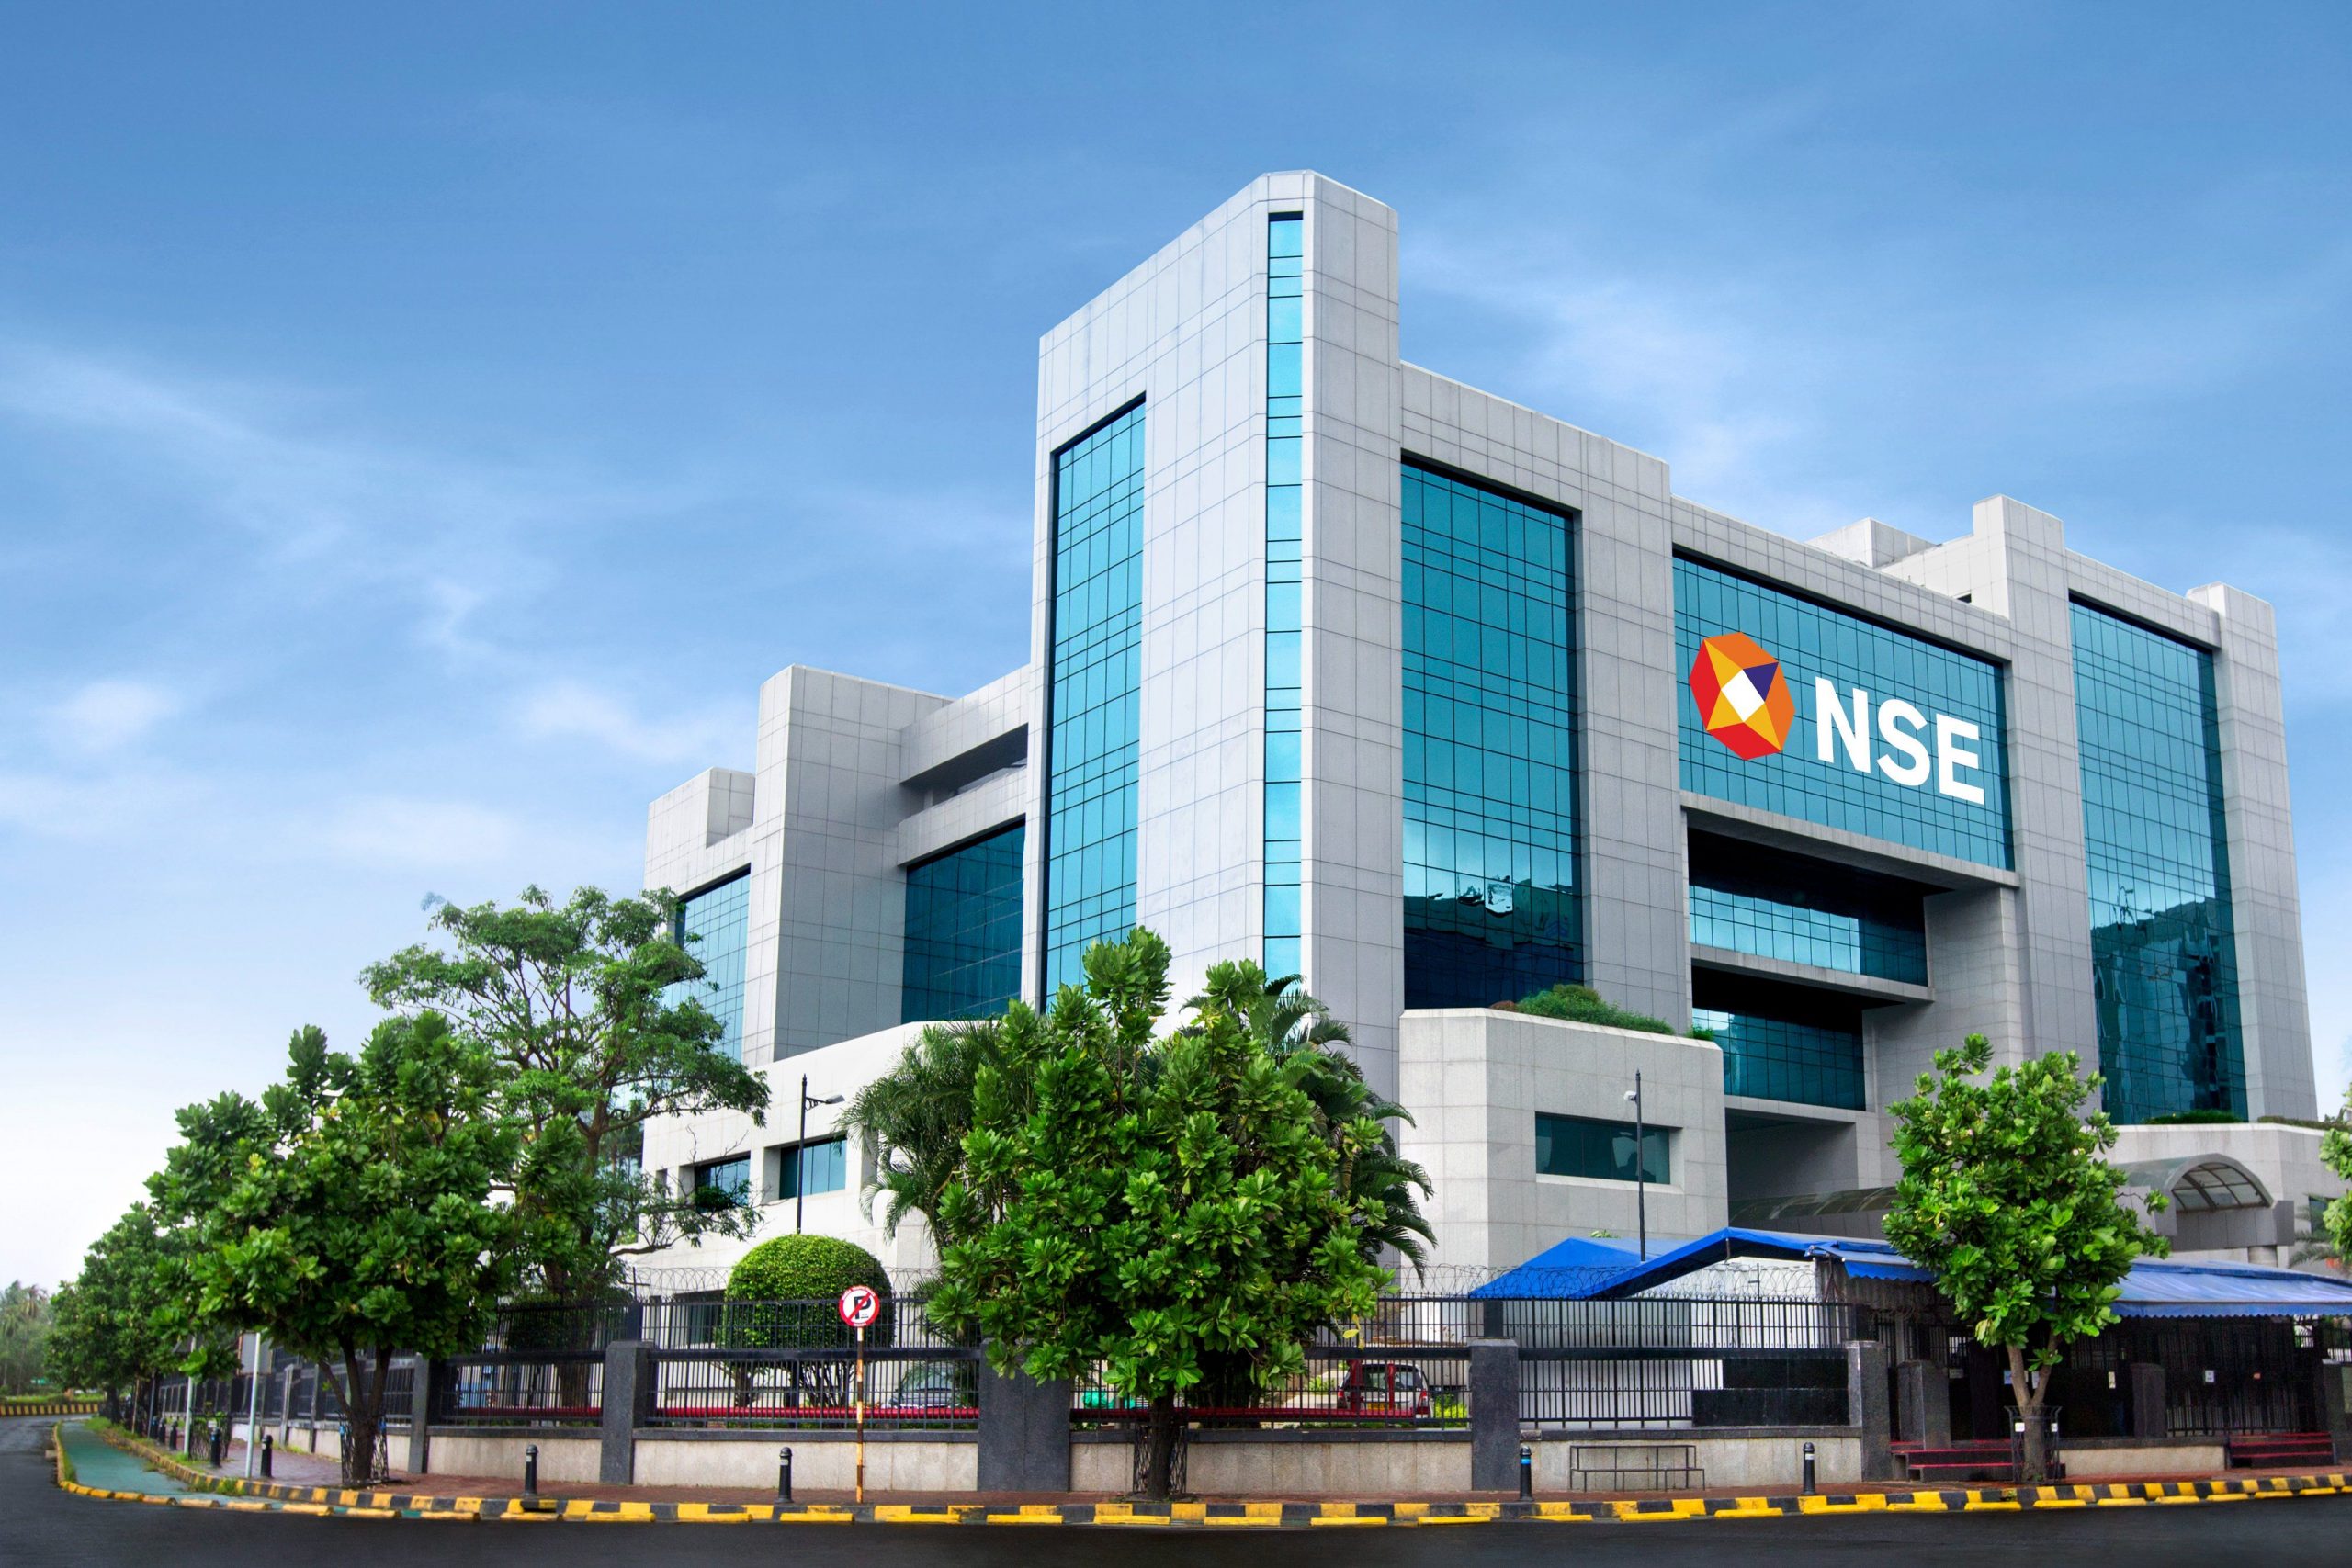 NSE F&O Ban: No security has been put under ban today